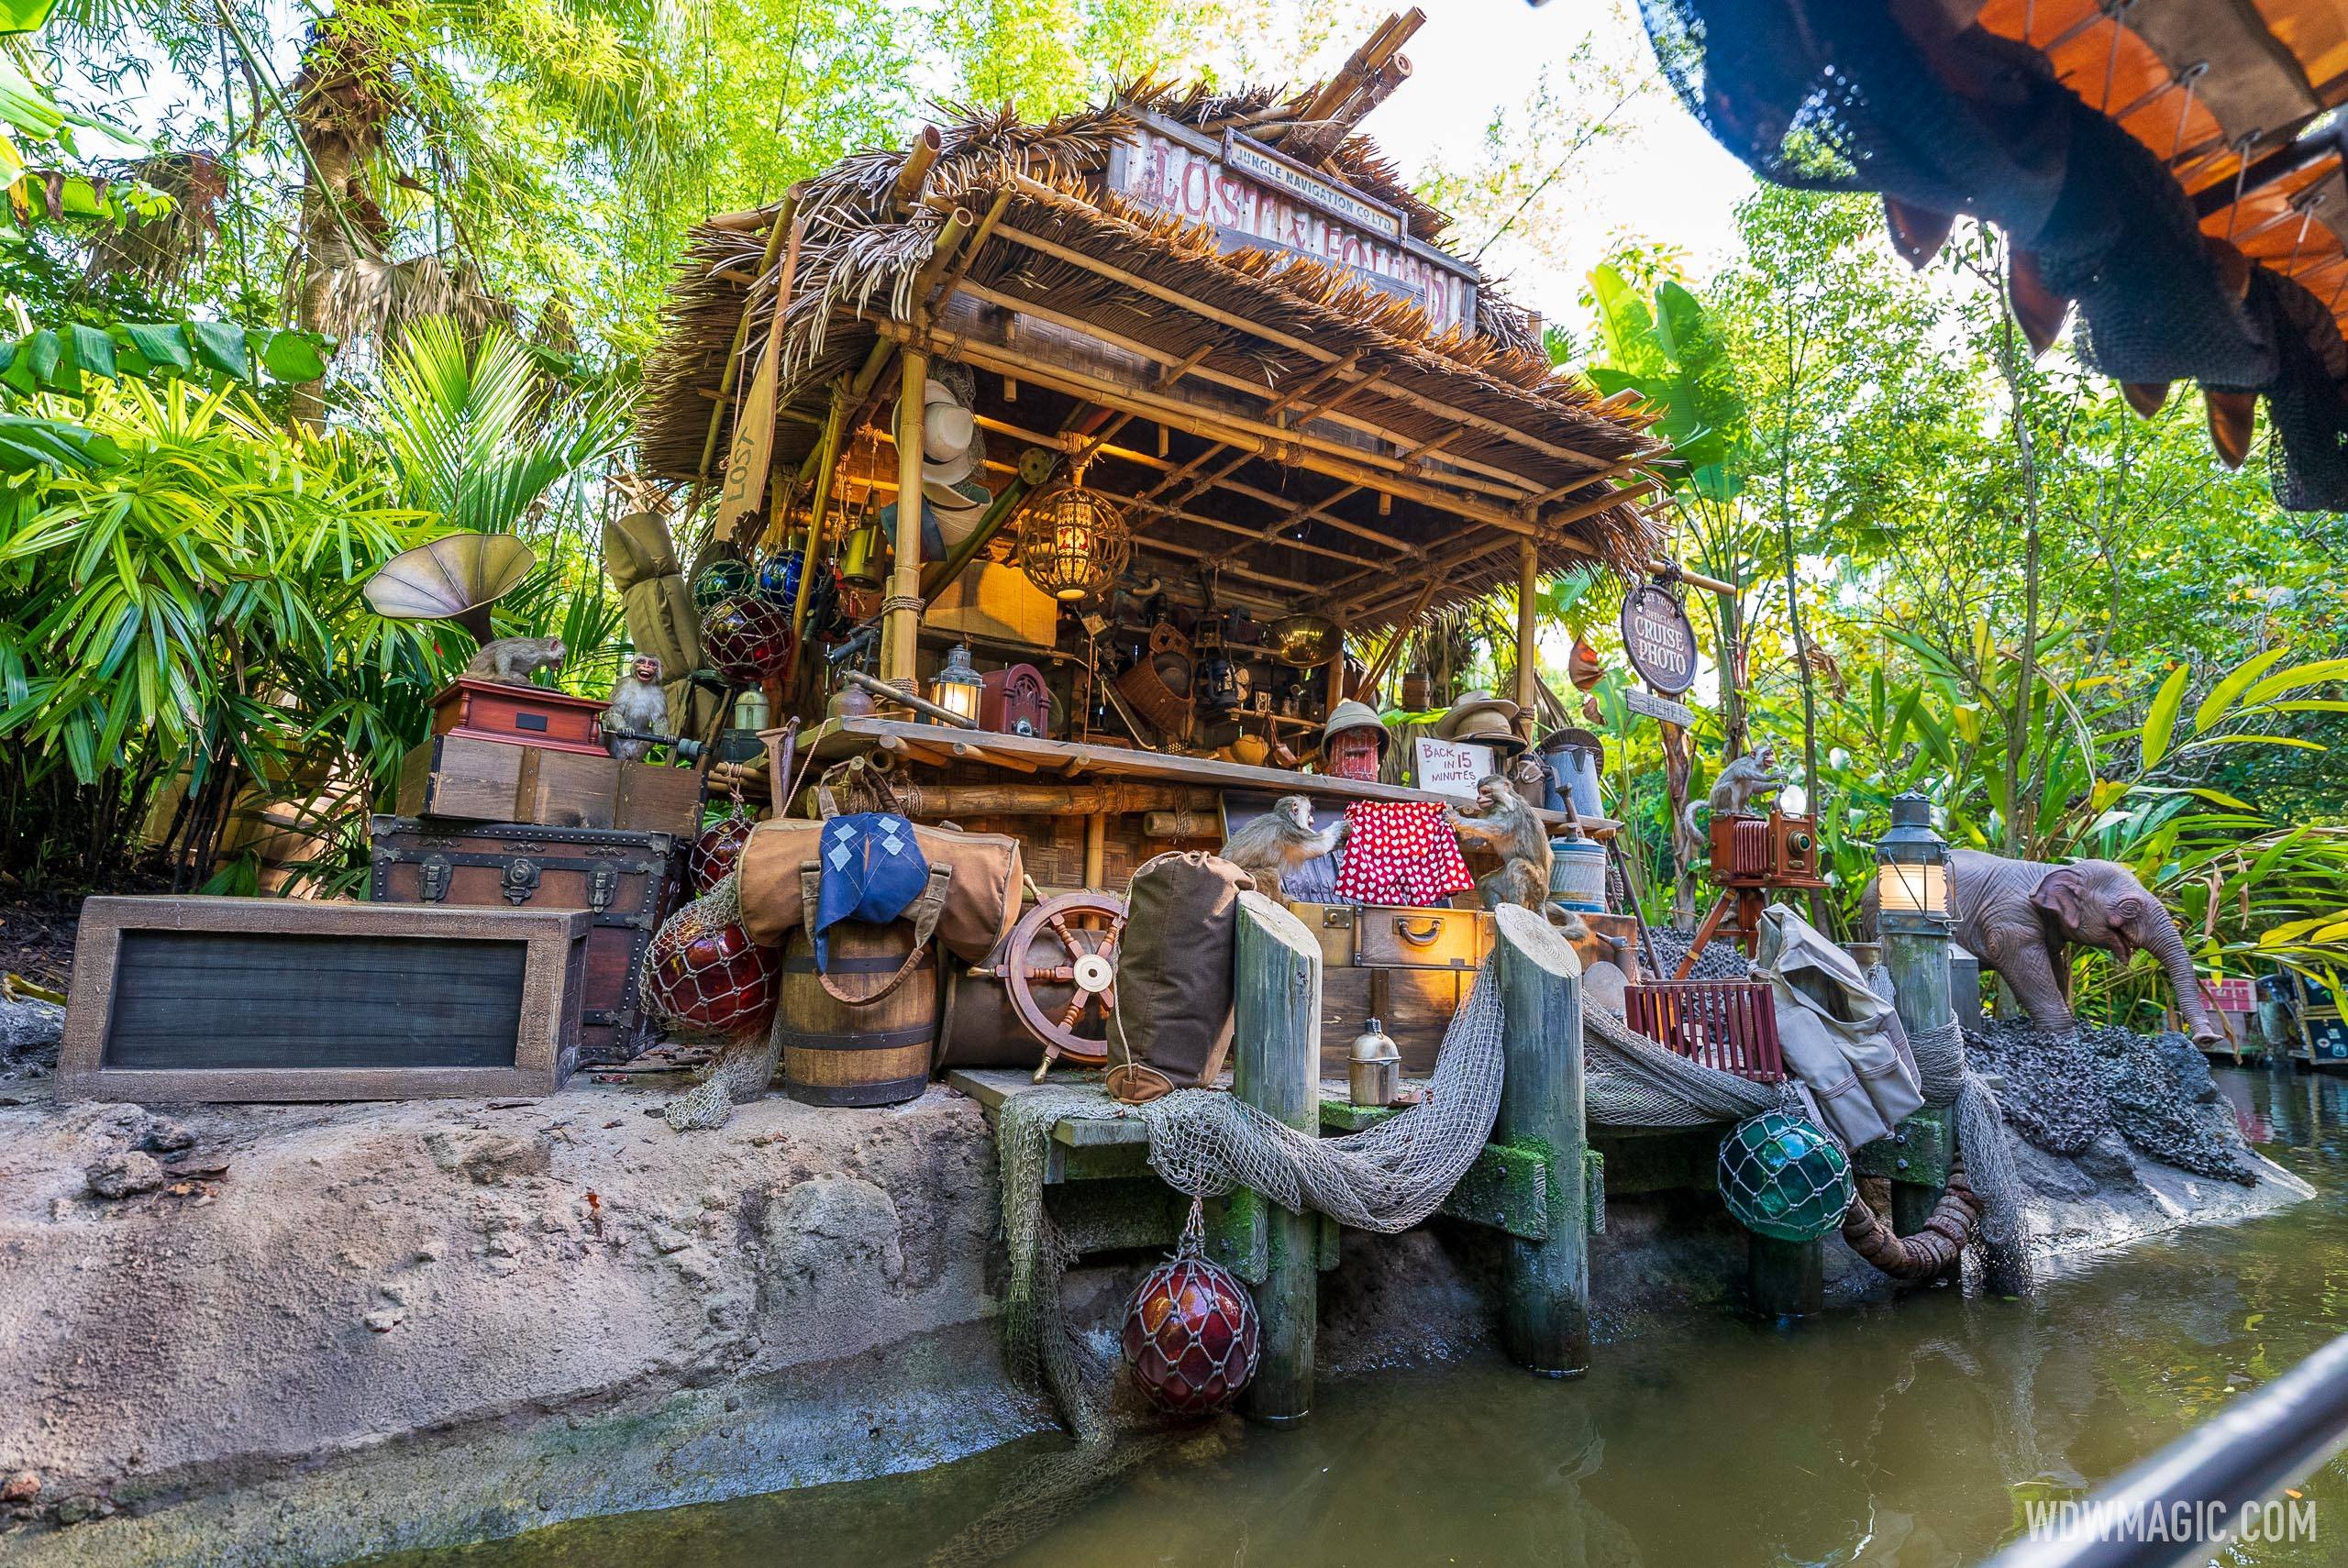 Animated figures added to Trader Sam's Gift Shop scene